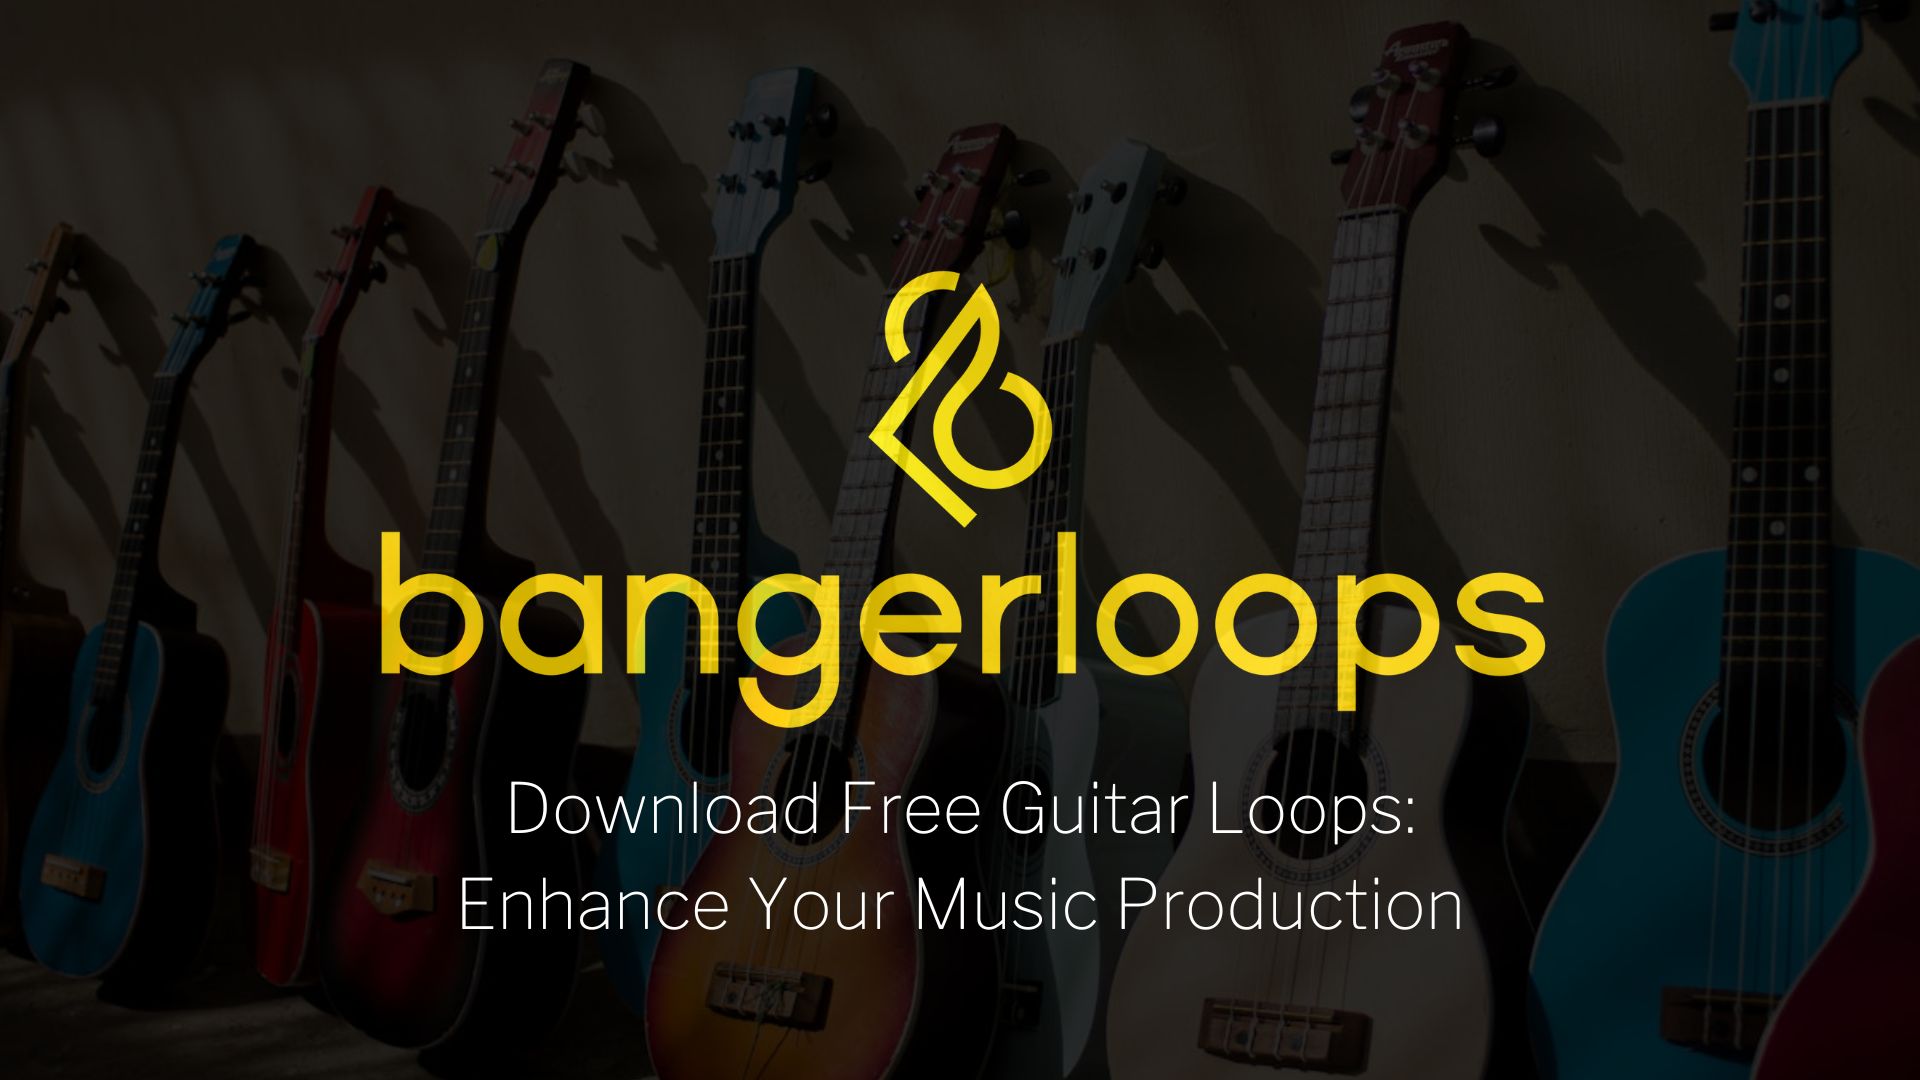 Download Free Guitar Loops Enhance Your Music Production featured image